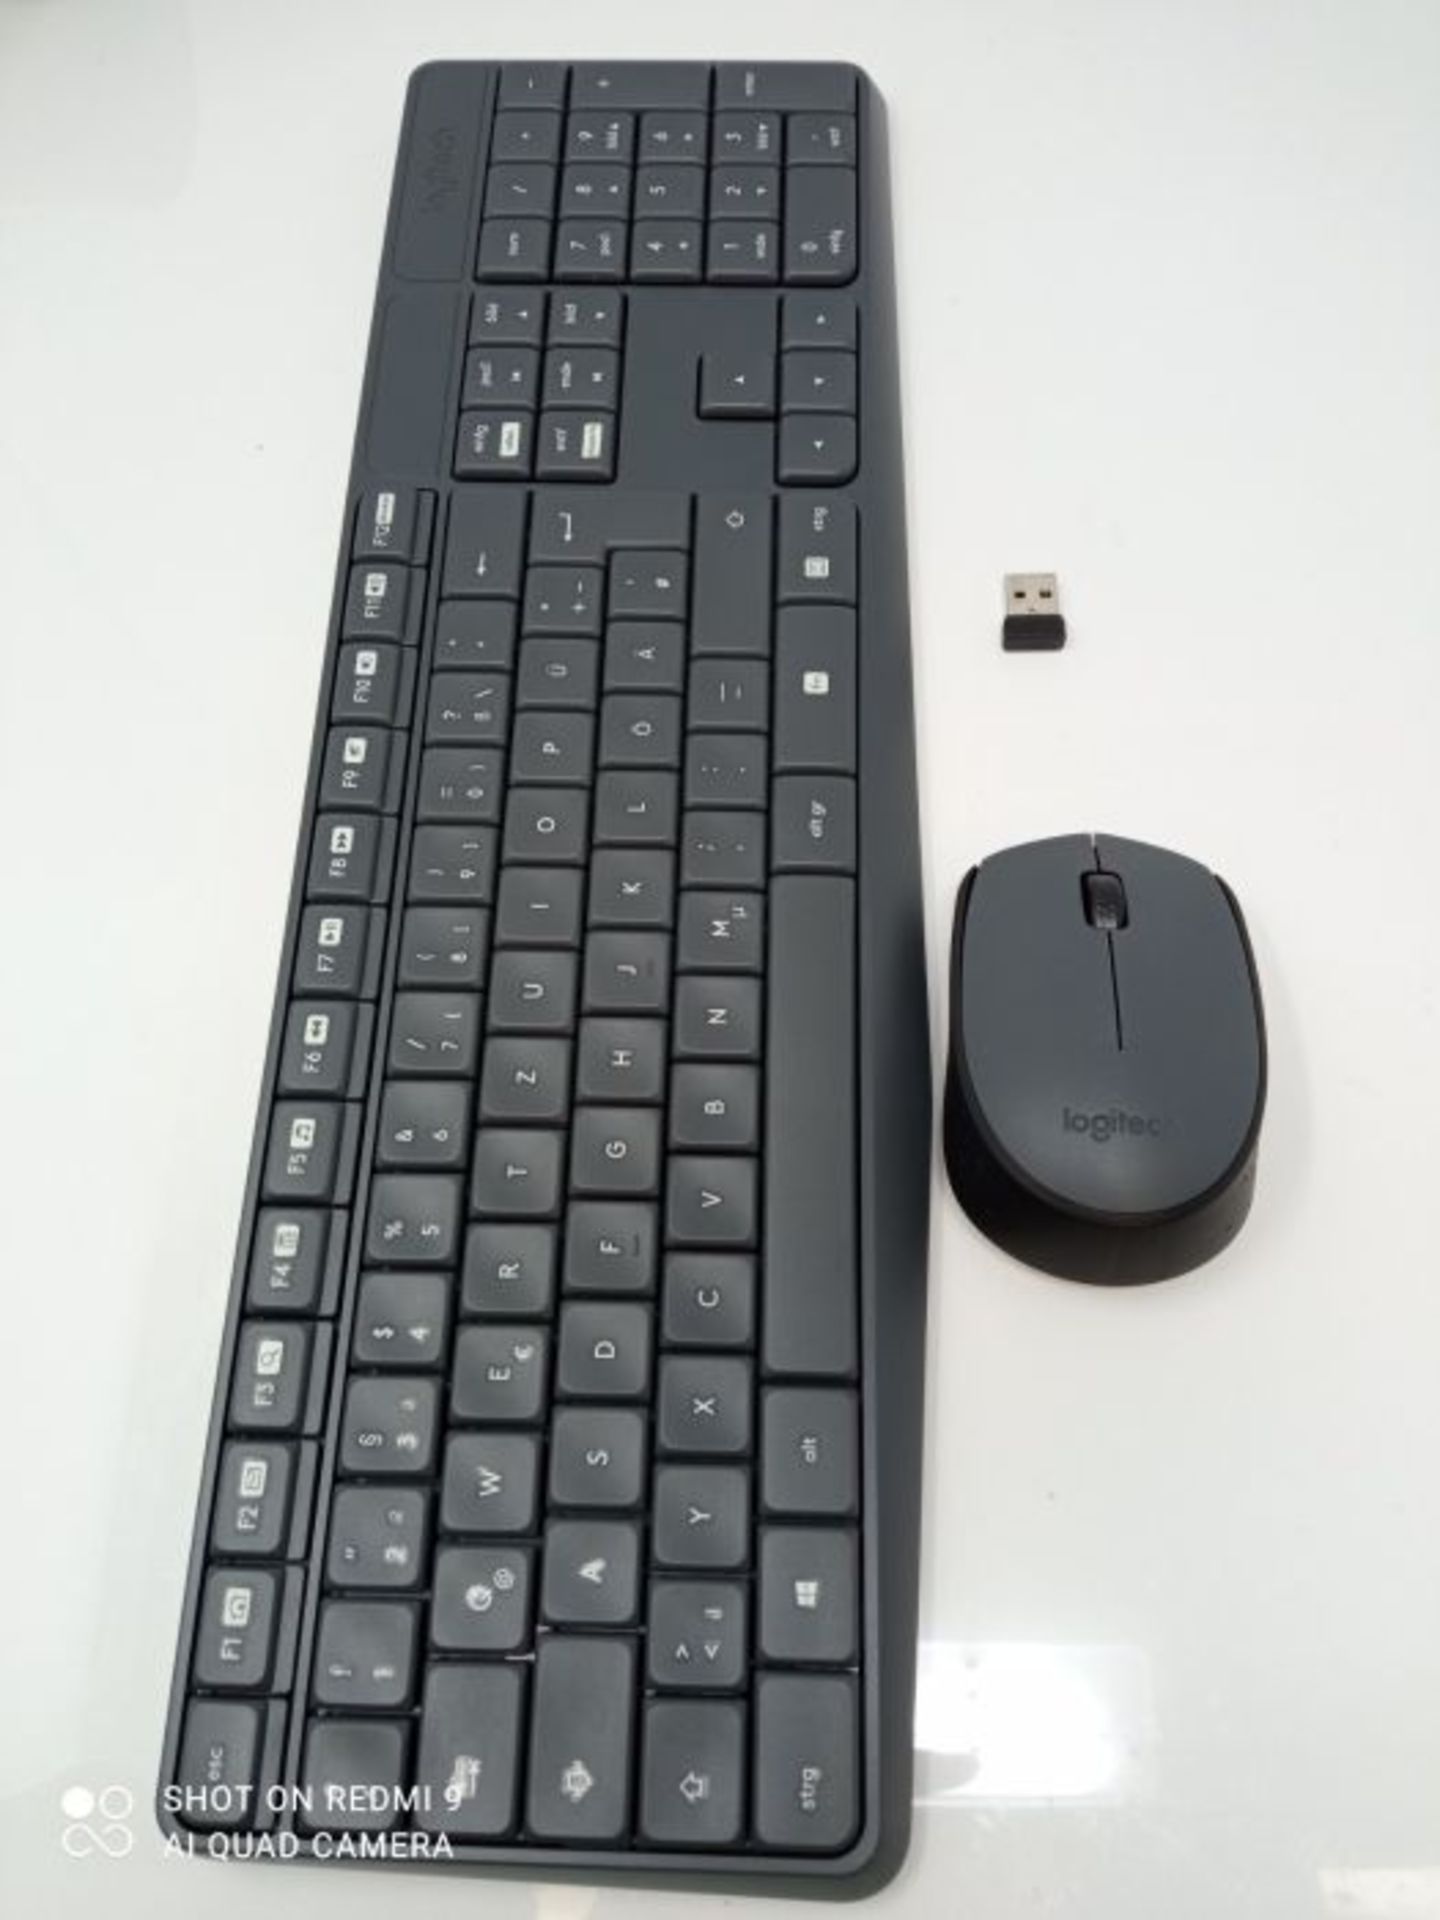 Logitech MK270 Wireless Keyboard and Mouse Combo for Windows, 2.4 GHz Wireless, Compac - Image 2 of 3